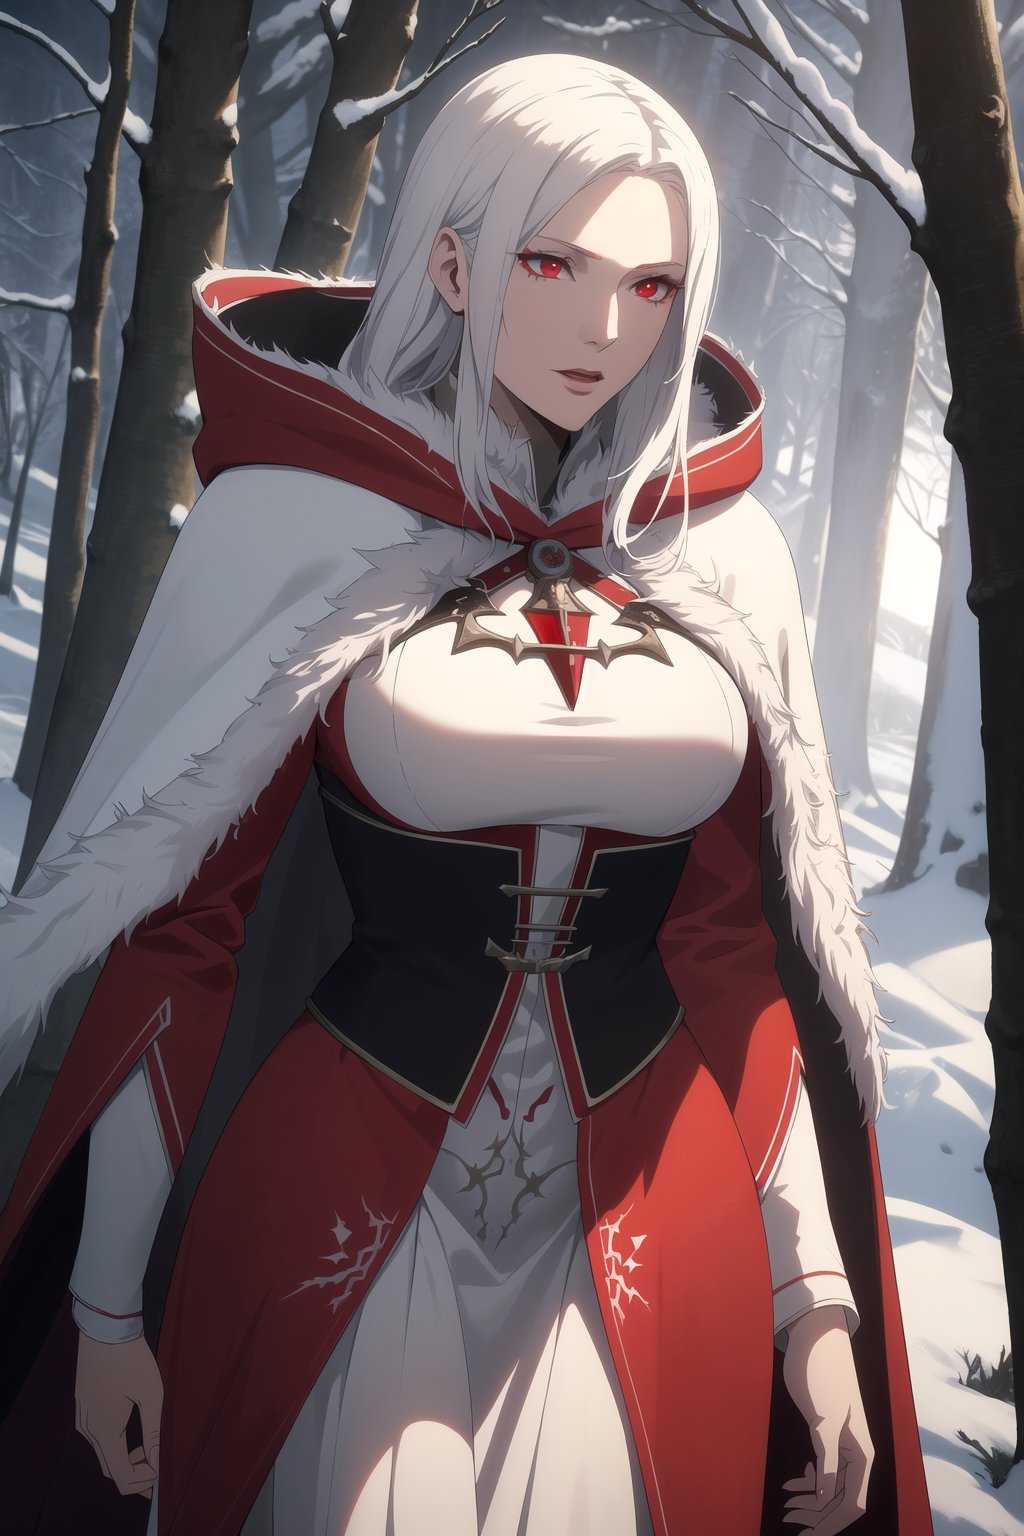 (Masterpiece, Best Quality), (A Gorgeous 30-Year-Old Female Blood Witch), (Unkempt White Hair), (Spirit-Seeing Red Eyes:1.2), (Aged and Blood-Marked Skin), (Red and White Hooded Witch Robe with Fur Cloak:1.2), (Mystical Snowy Forest at Night:1.4), (Walking Pose:1.4), Centered, (Half Body Shot:1.4), (From Front Shot:1.2), Insane Details, Intricate Face Detail, Intricate Hand Details, Cinematic Shot and Lighting, Realistic and Vibrant Colors, Sharp Focus, Ultra Detailed, Realistic Images, Depth of Field, Incredibly Realistic Environment and Scene, Master Composition and Cinematography, castlevania style,castlevania style